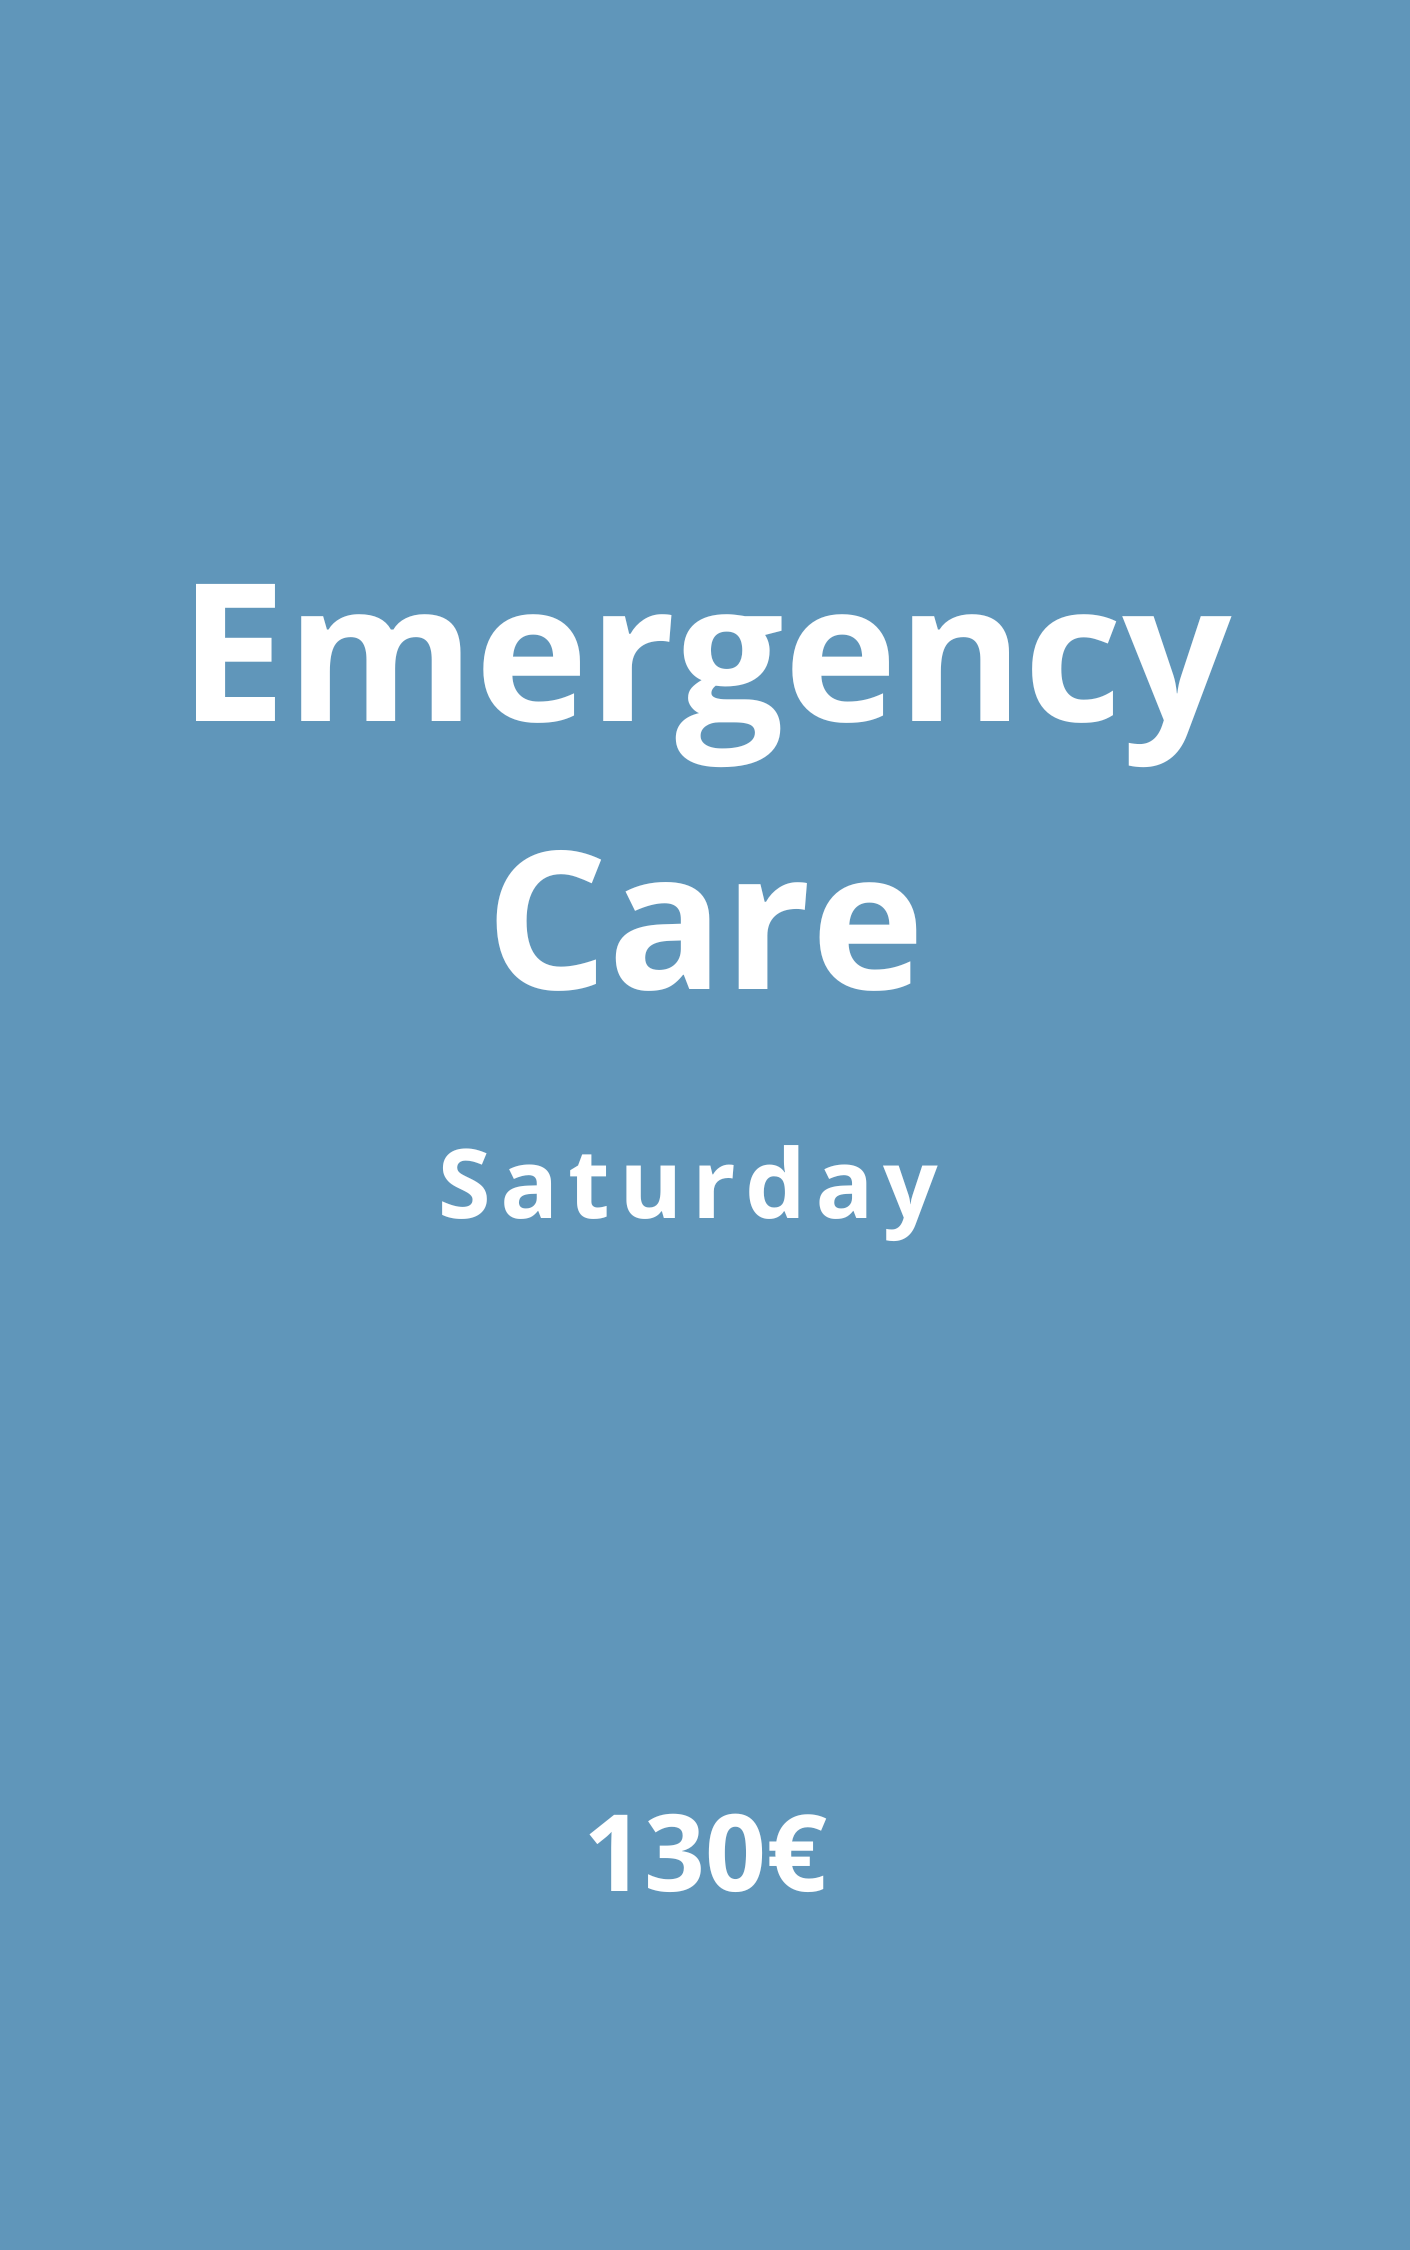 Available for emergency osteopathy sessions on Saturdays